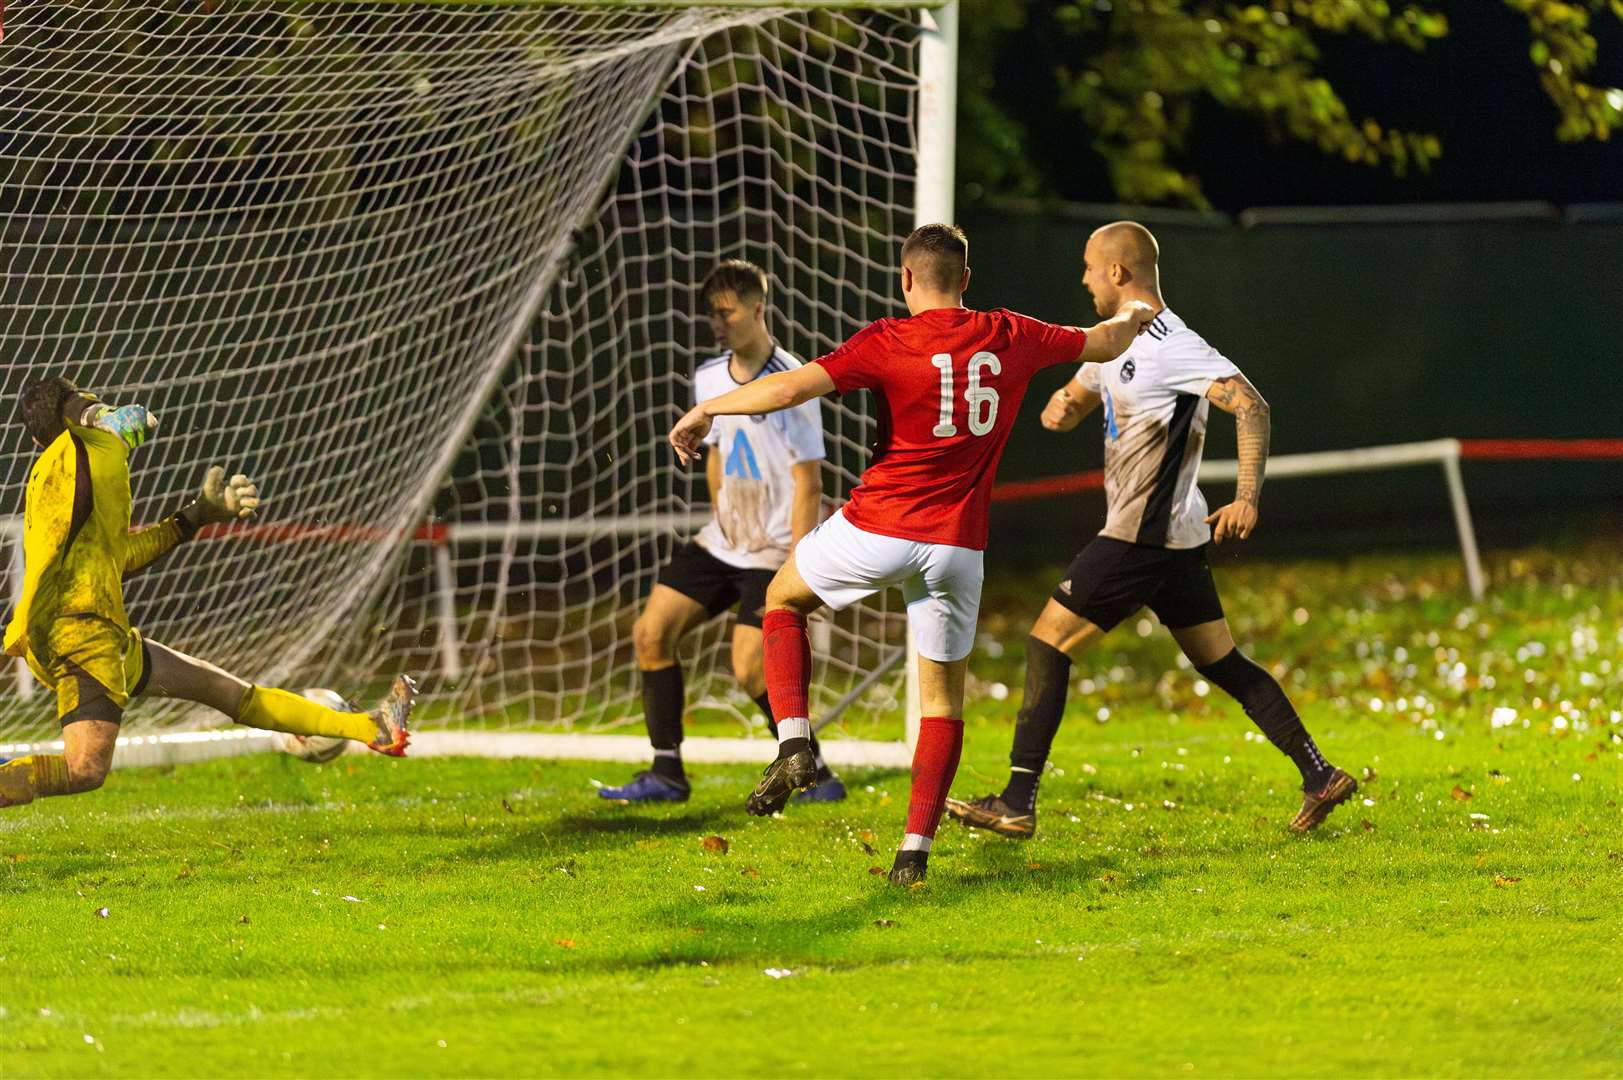 Fletcher Toll scored his first goal for his new club. Picture: Ian Burt